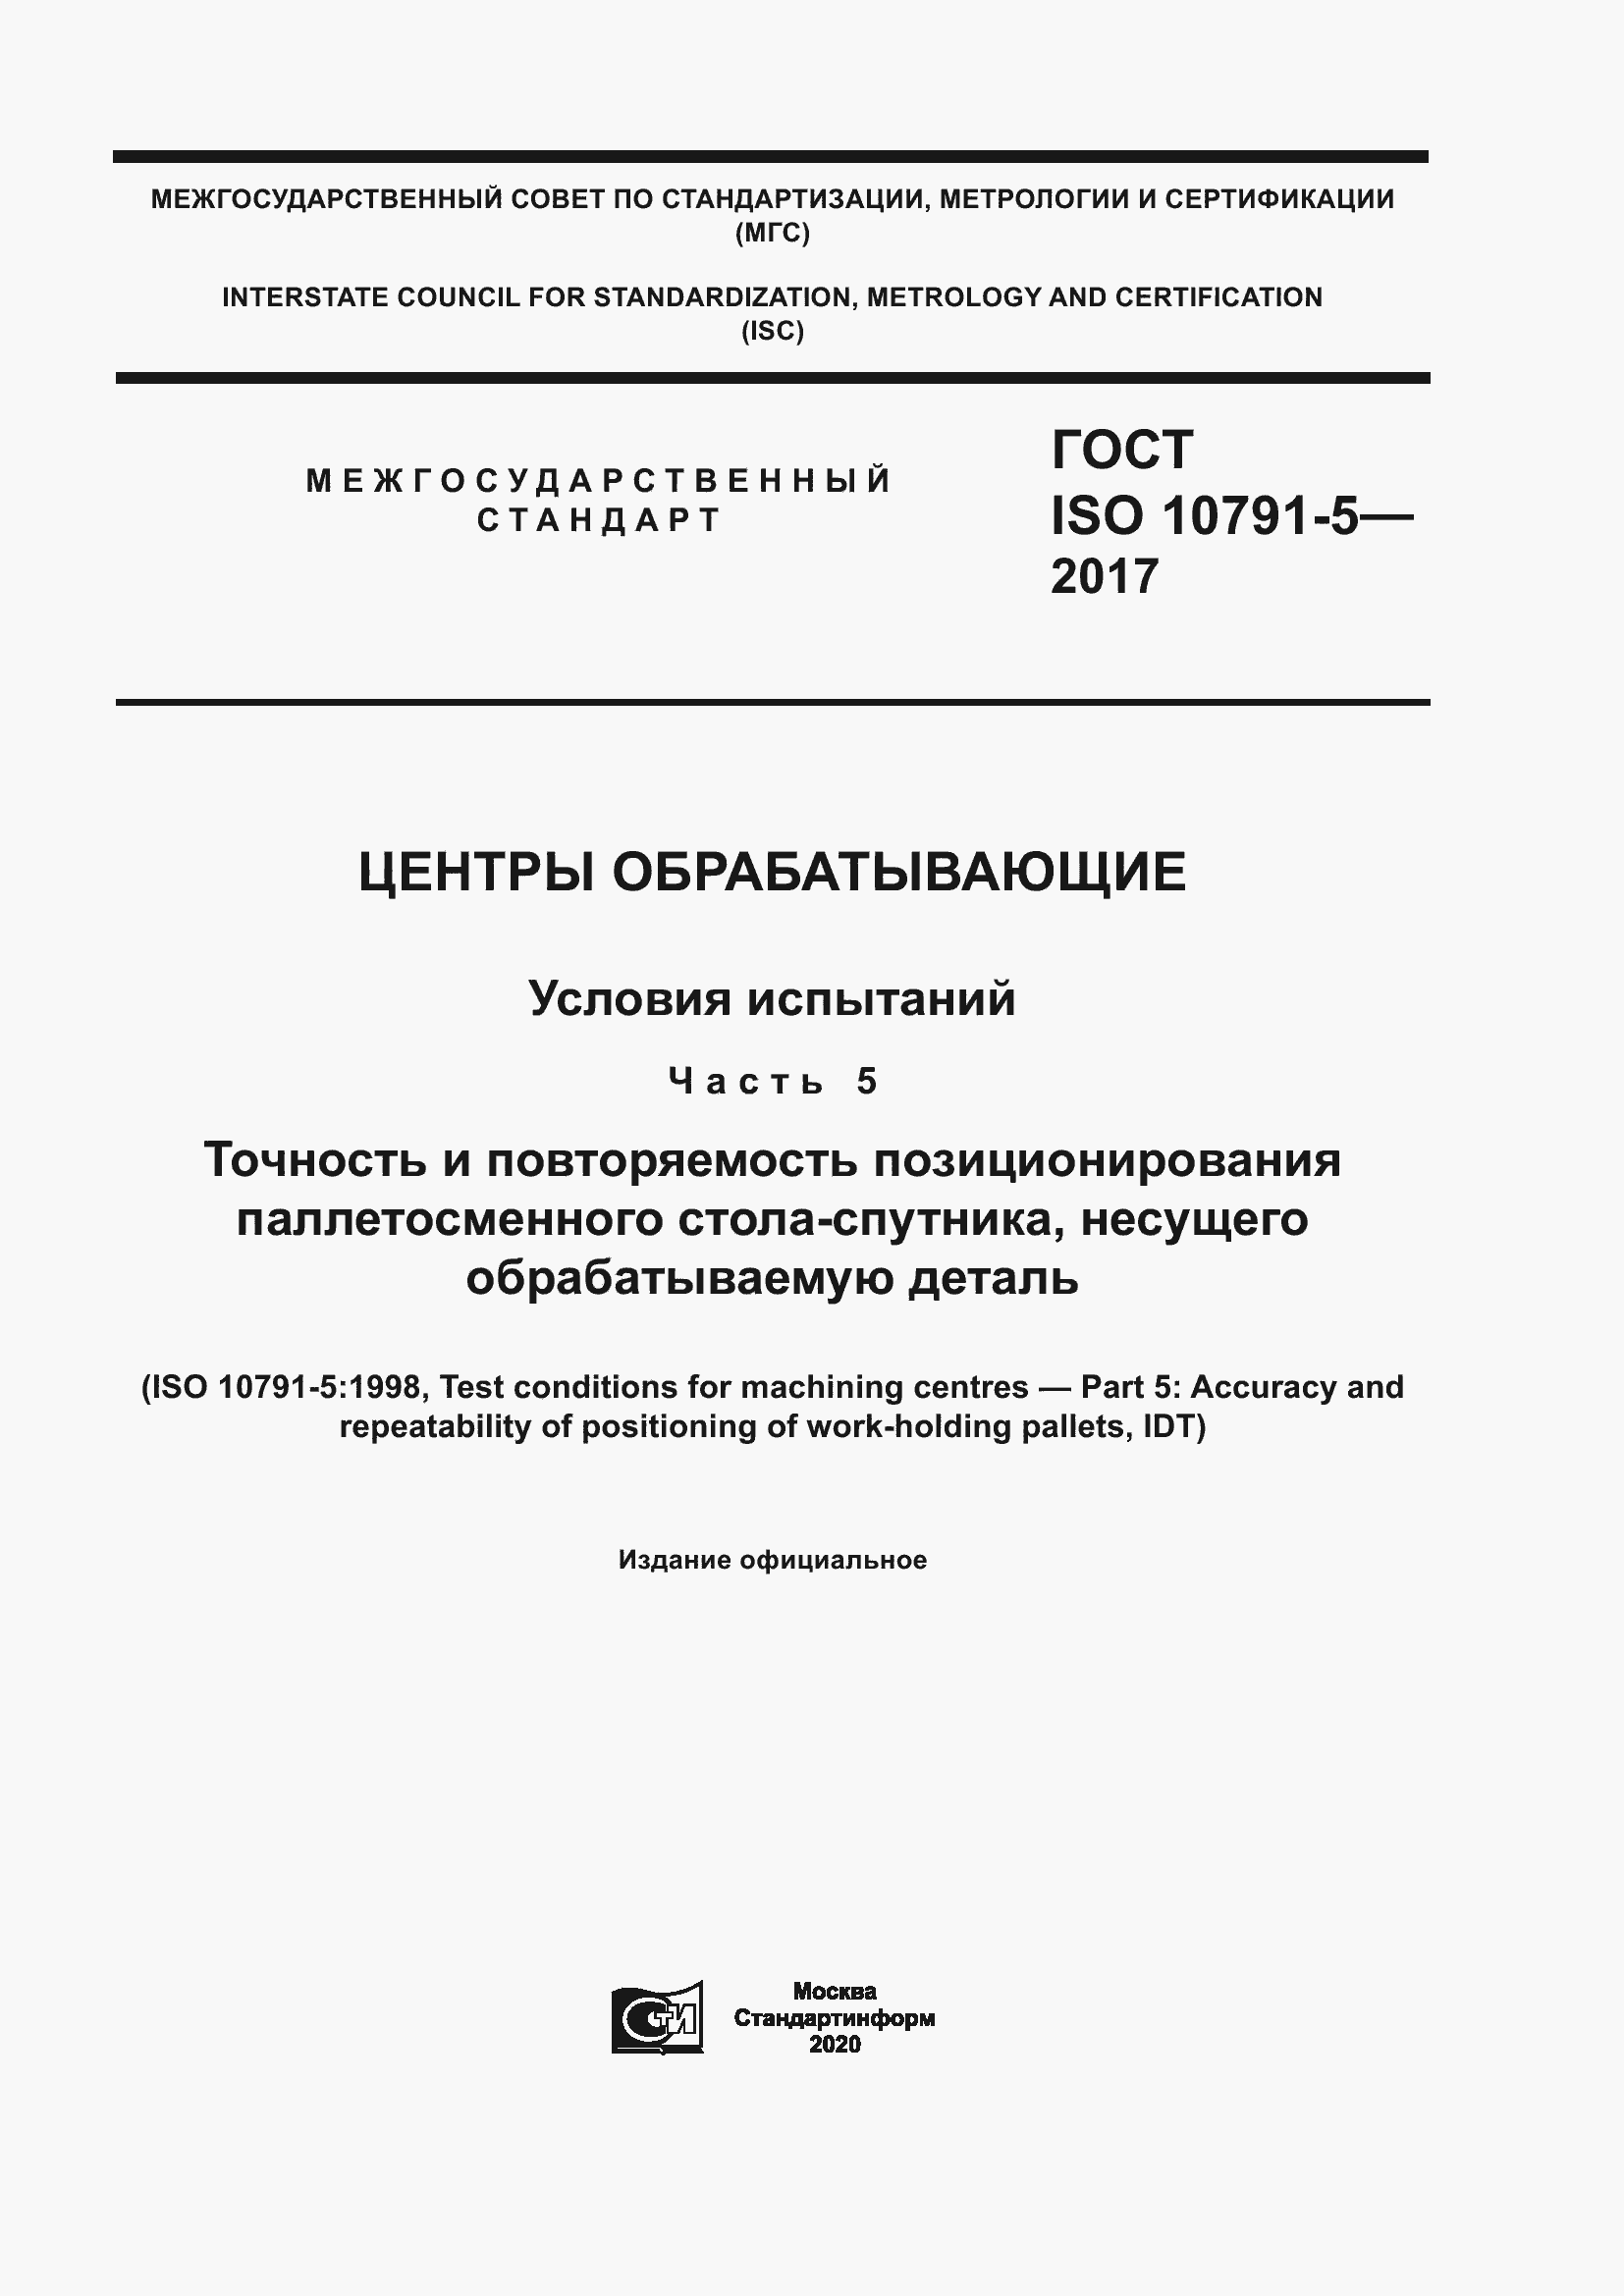  ISO 10791-5-2017.  1